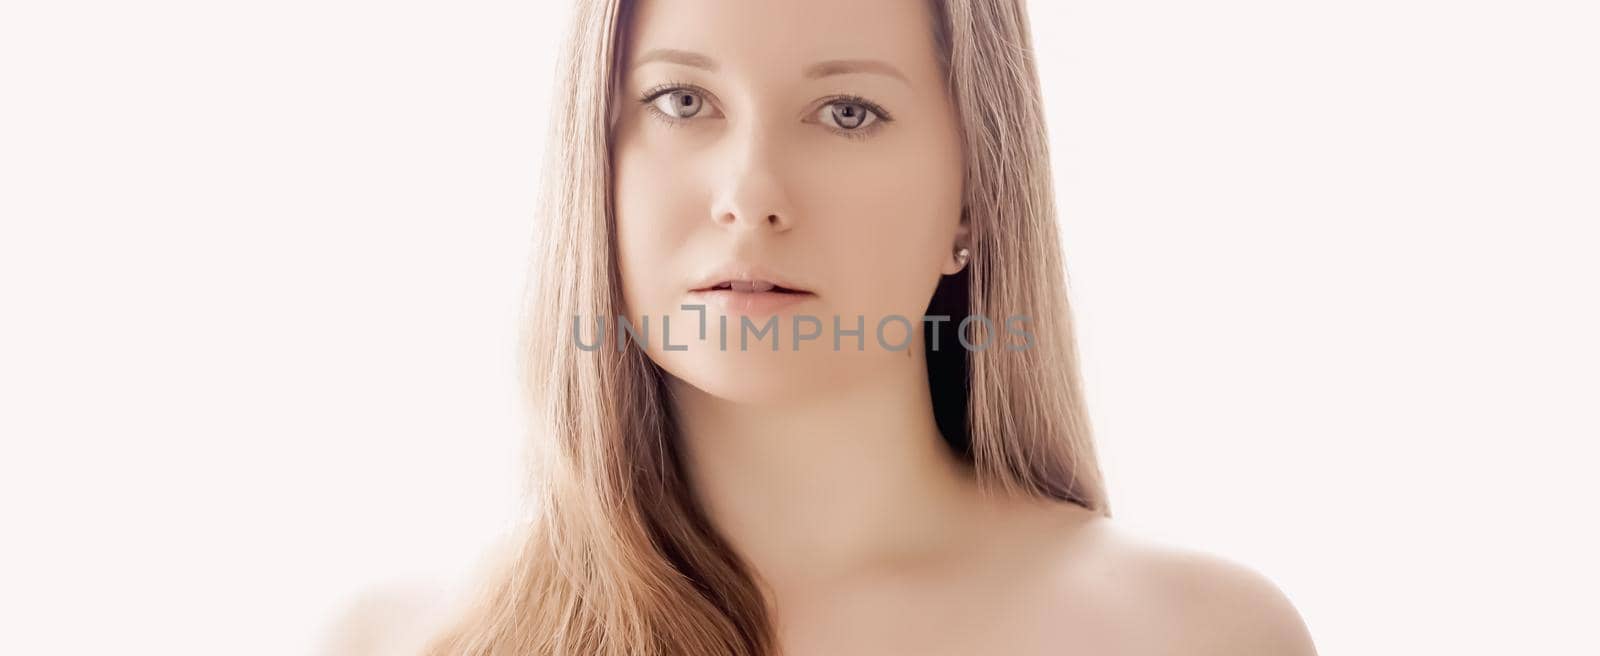 Beautiful woman with natural look, perfect skin and shiny hair as make-up, health and wellness concept. Face portrait of young female model for skincare cosmetics and luxury beauty ad design.